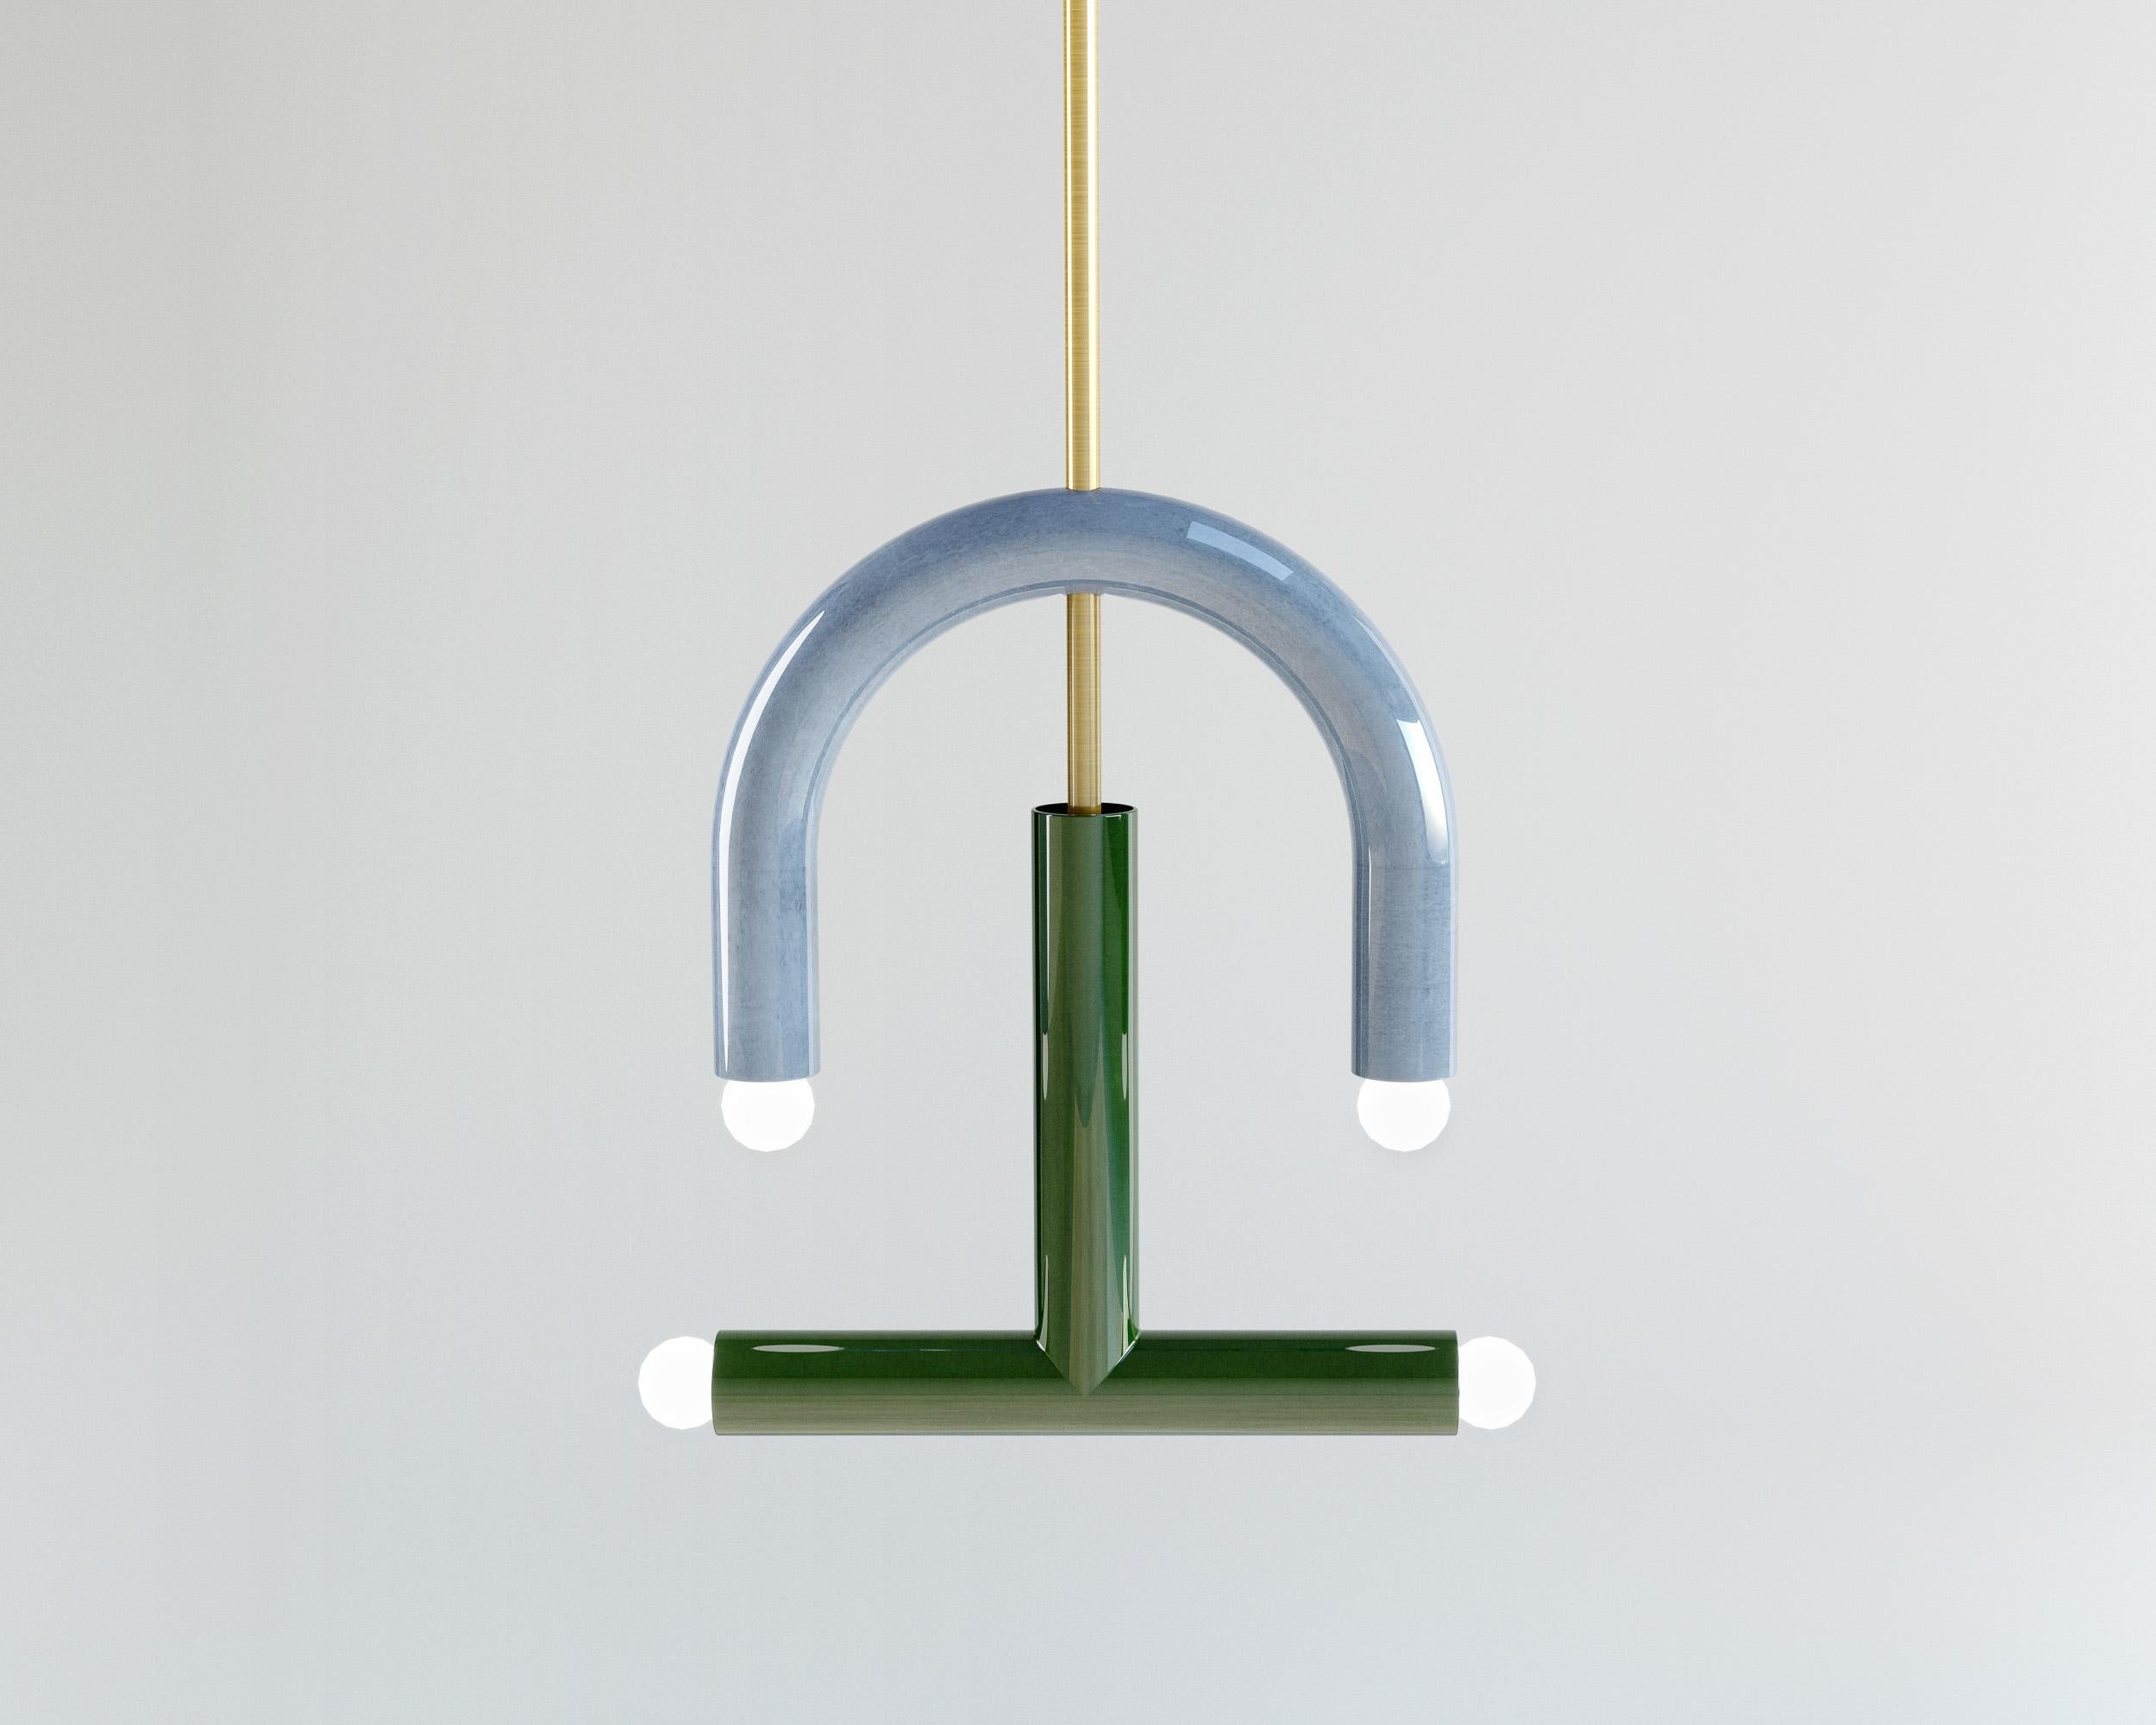 TRN C3 Pendant lamp / ceiling lamp / chandelier 
Designer: Pani Jurek

Dimensions: H 45 x 35 x 5 cm
Model shown: Light blue & green 

Bulb (not included): E27/E26, compatible with US electric system

Materials: Hand glazed ceramic and brass
Rod: